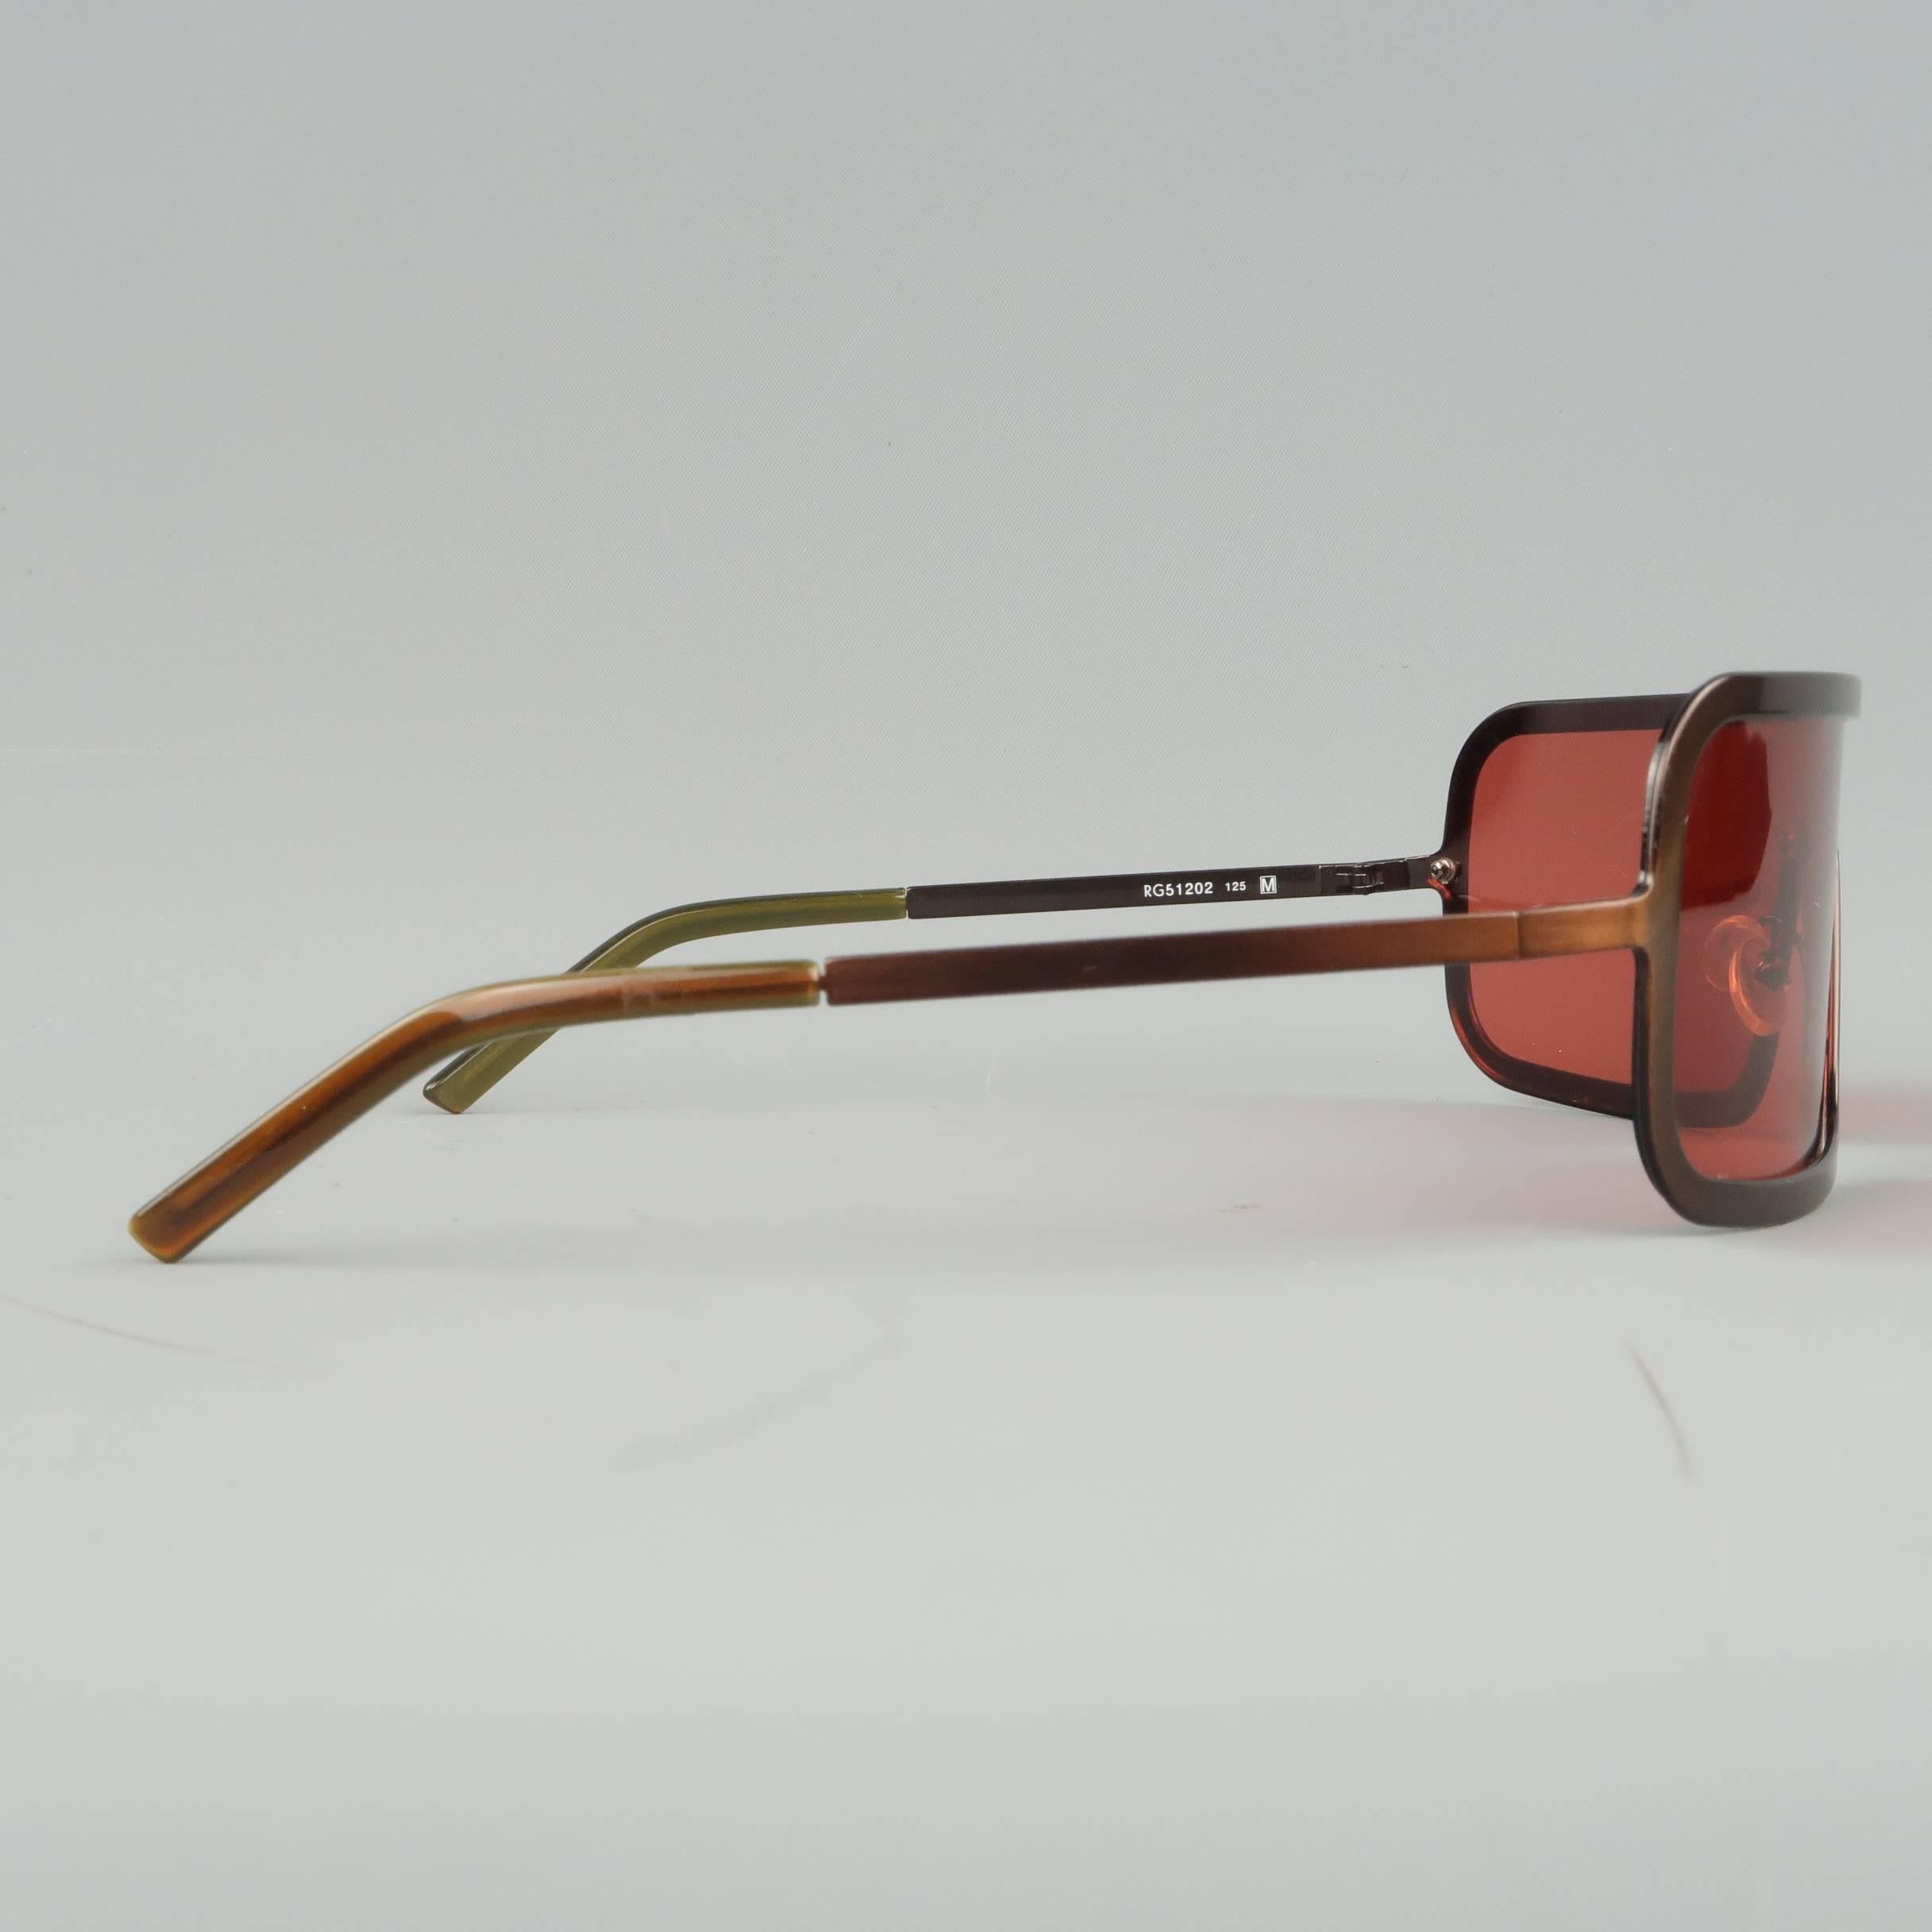 Archive ROMEO GIGLI sunglasses come in brushed copper tone metal with a red shield lens. Made in Italy.
 
Good Pre-Owned Condition.
Marked: RG51202 125
 
Measurements:
 
Length: 14.5 cm
Height: 4.75 cm.